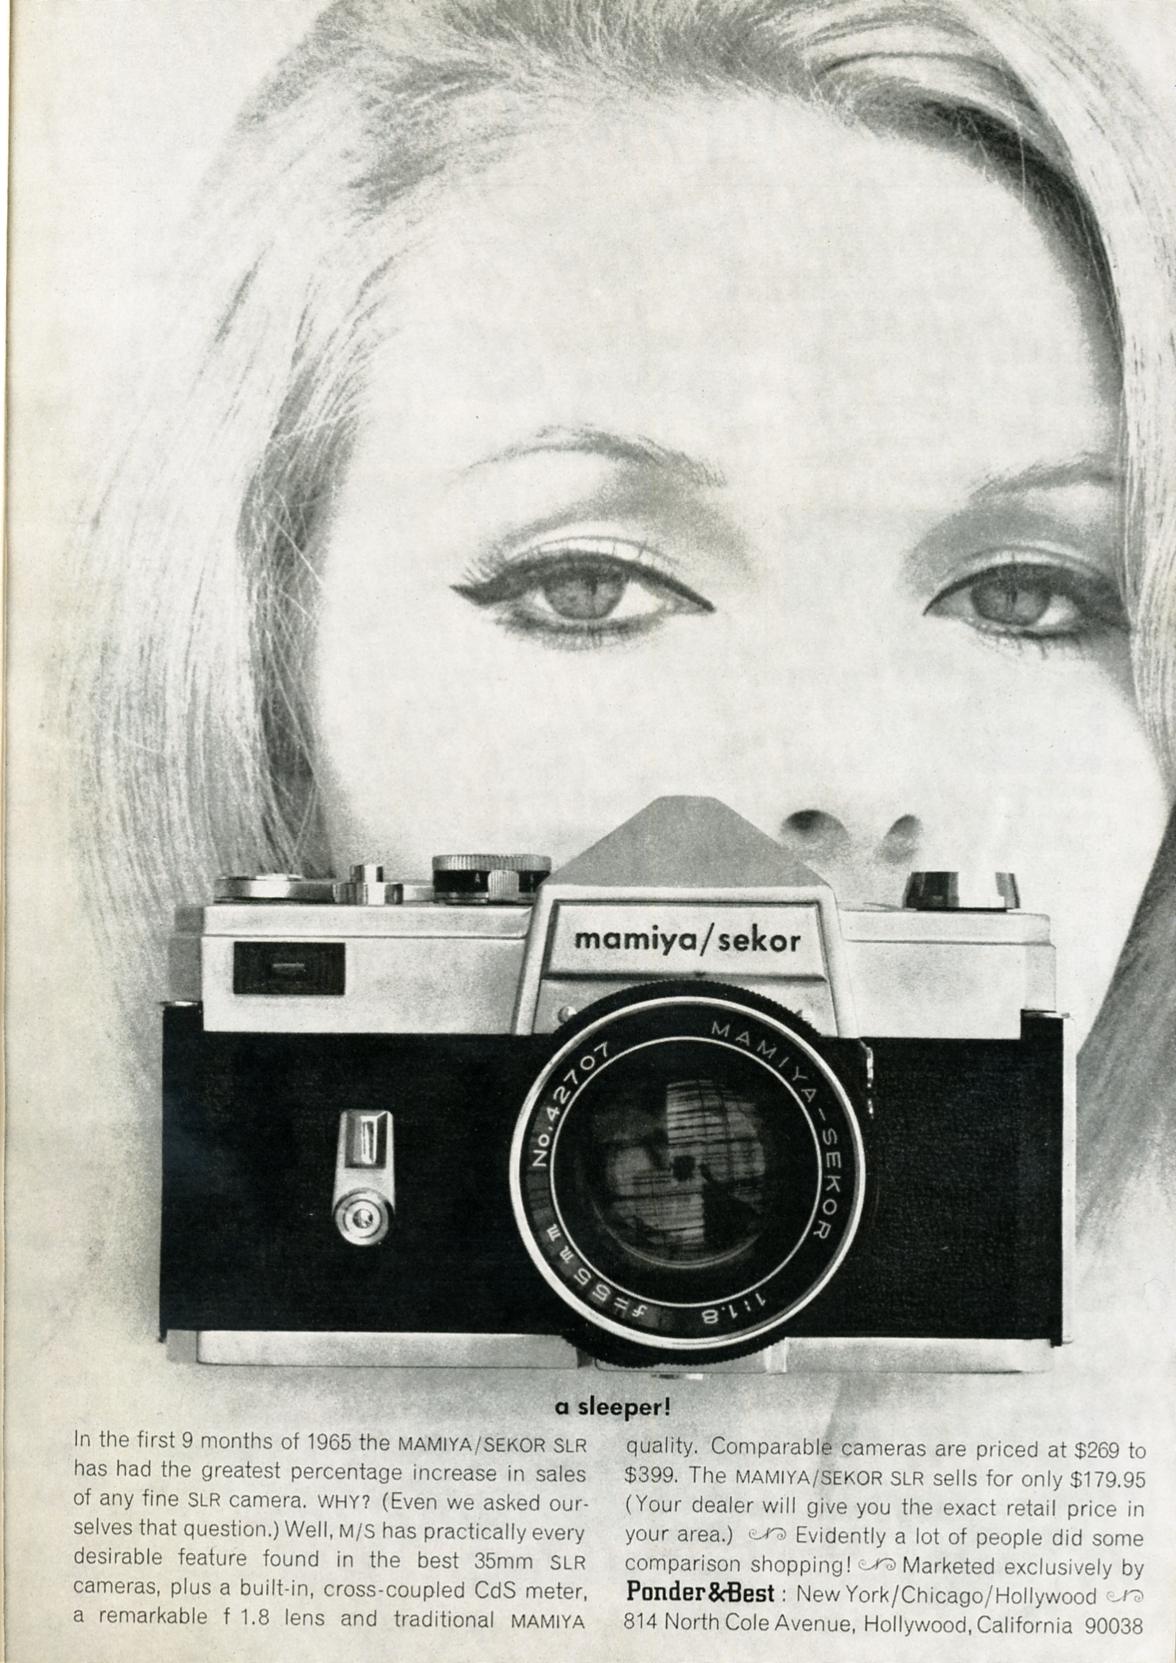 the advertit is featured with a girl holding an old camera